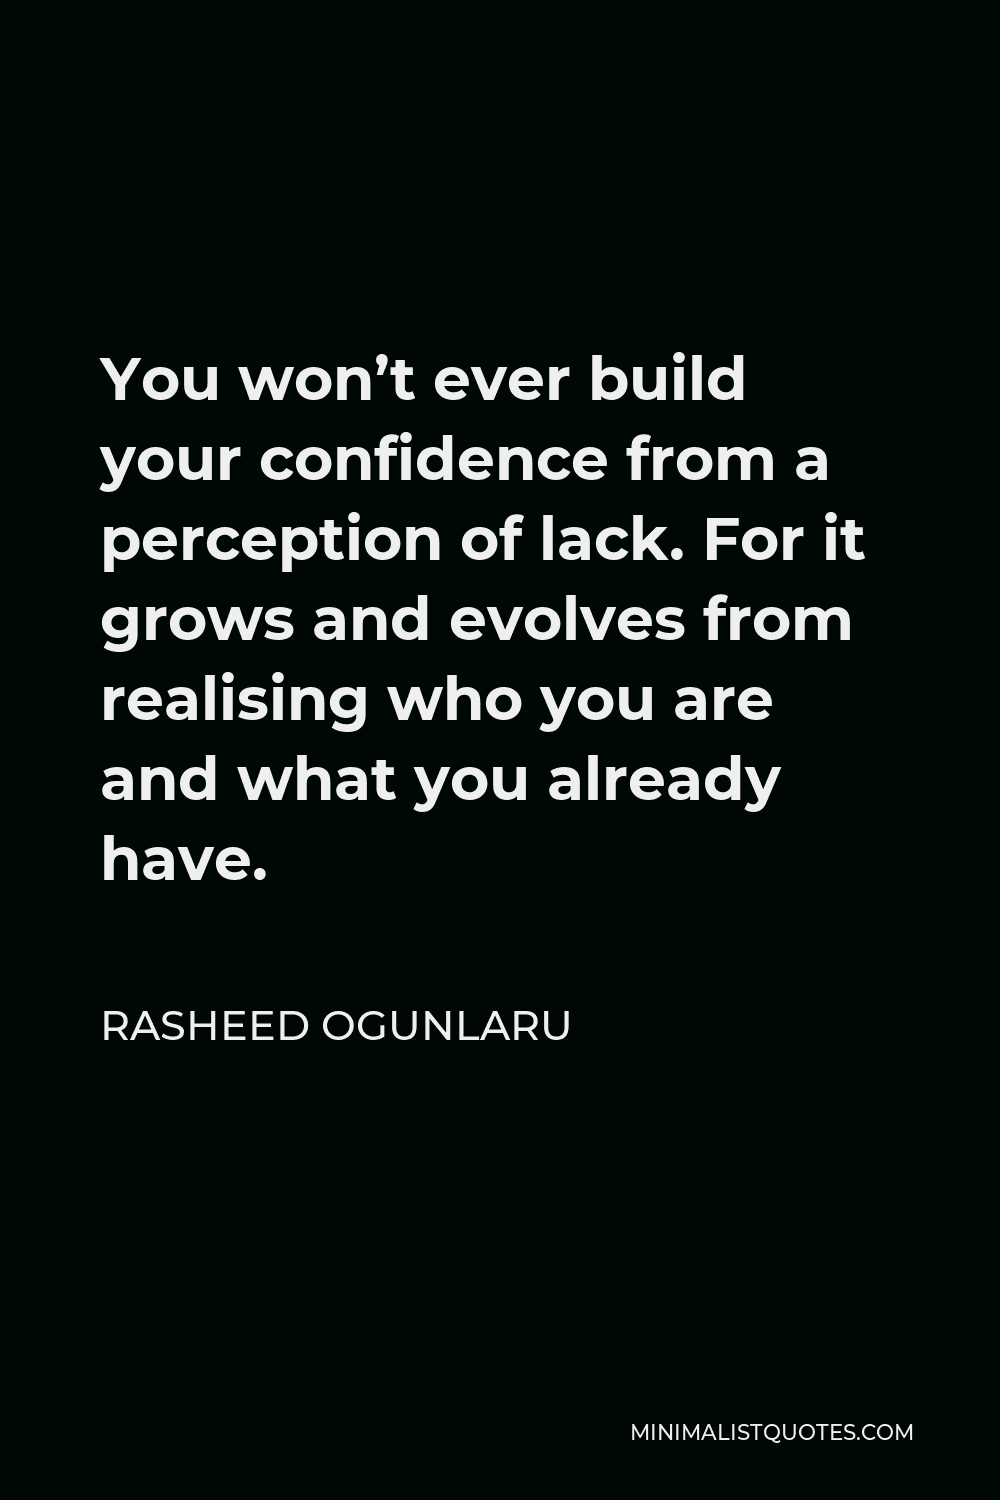 Rasheed Ogunlaru Quote - You won’t ever build your confidence from a perception of lack. For it grows and evolves from realising who you are and what you already have.